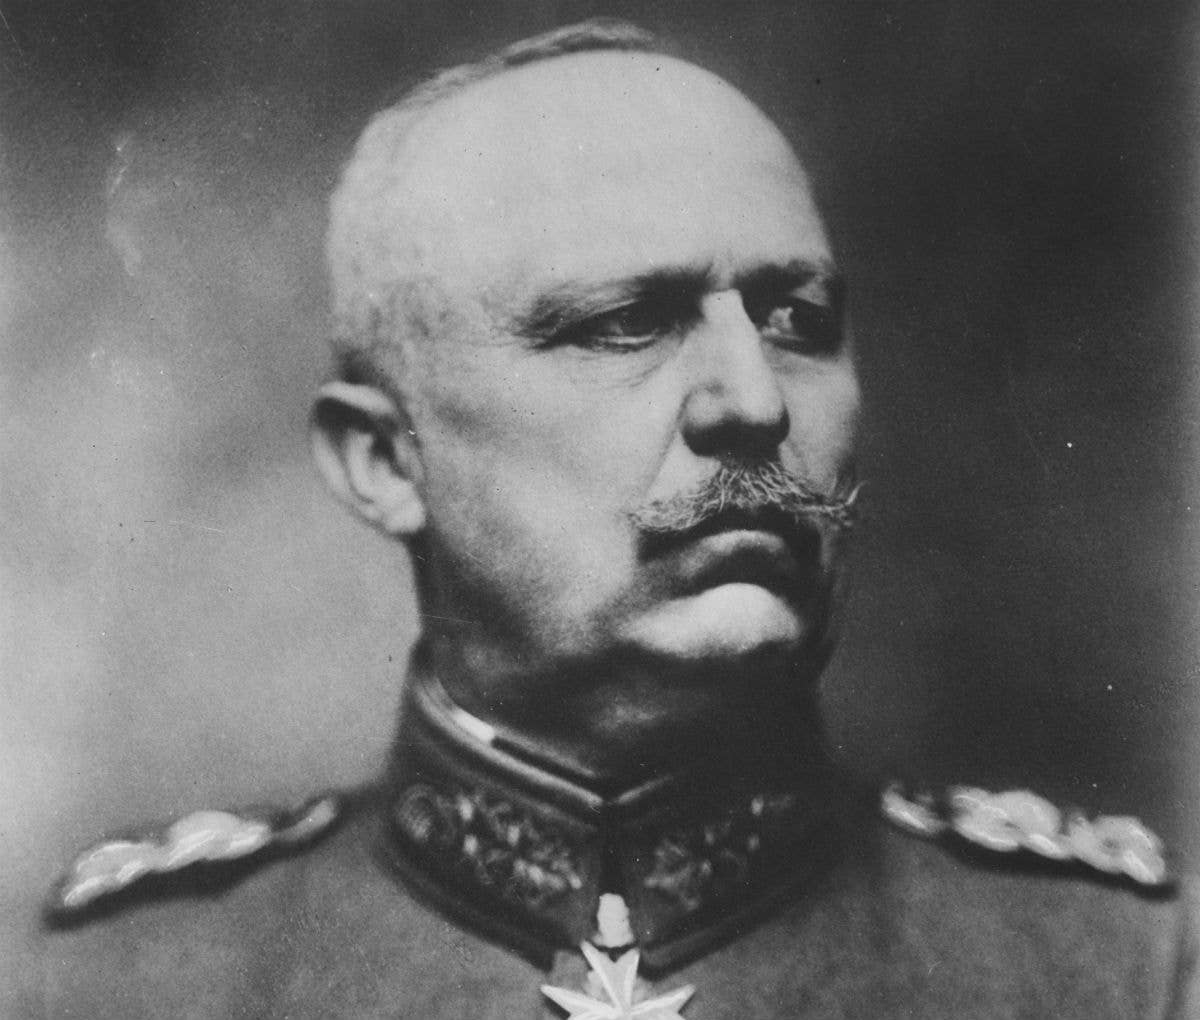 Gen. Erich Ludendorff. Photo from Wikimedia Commons